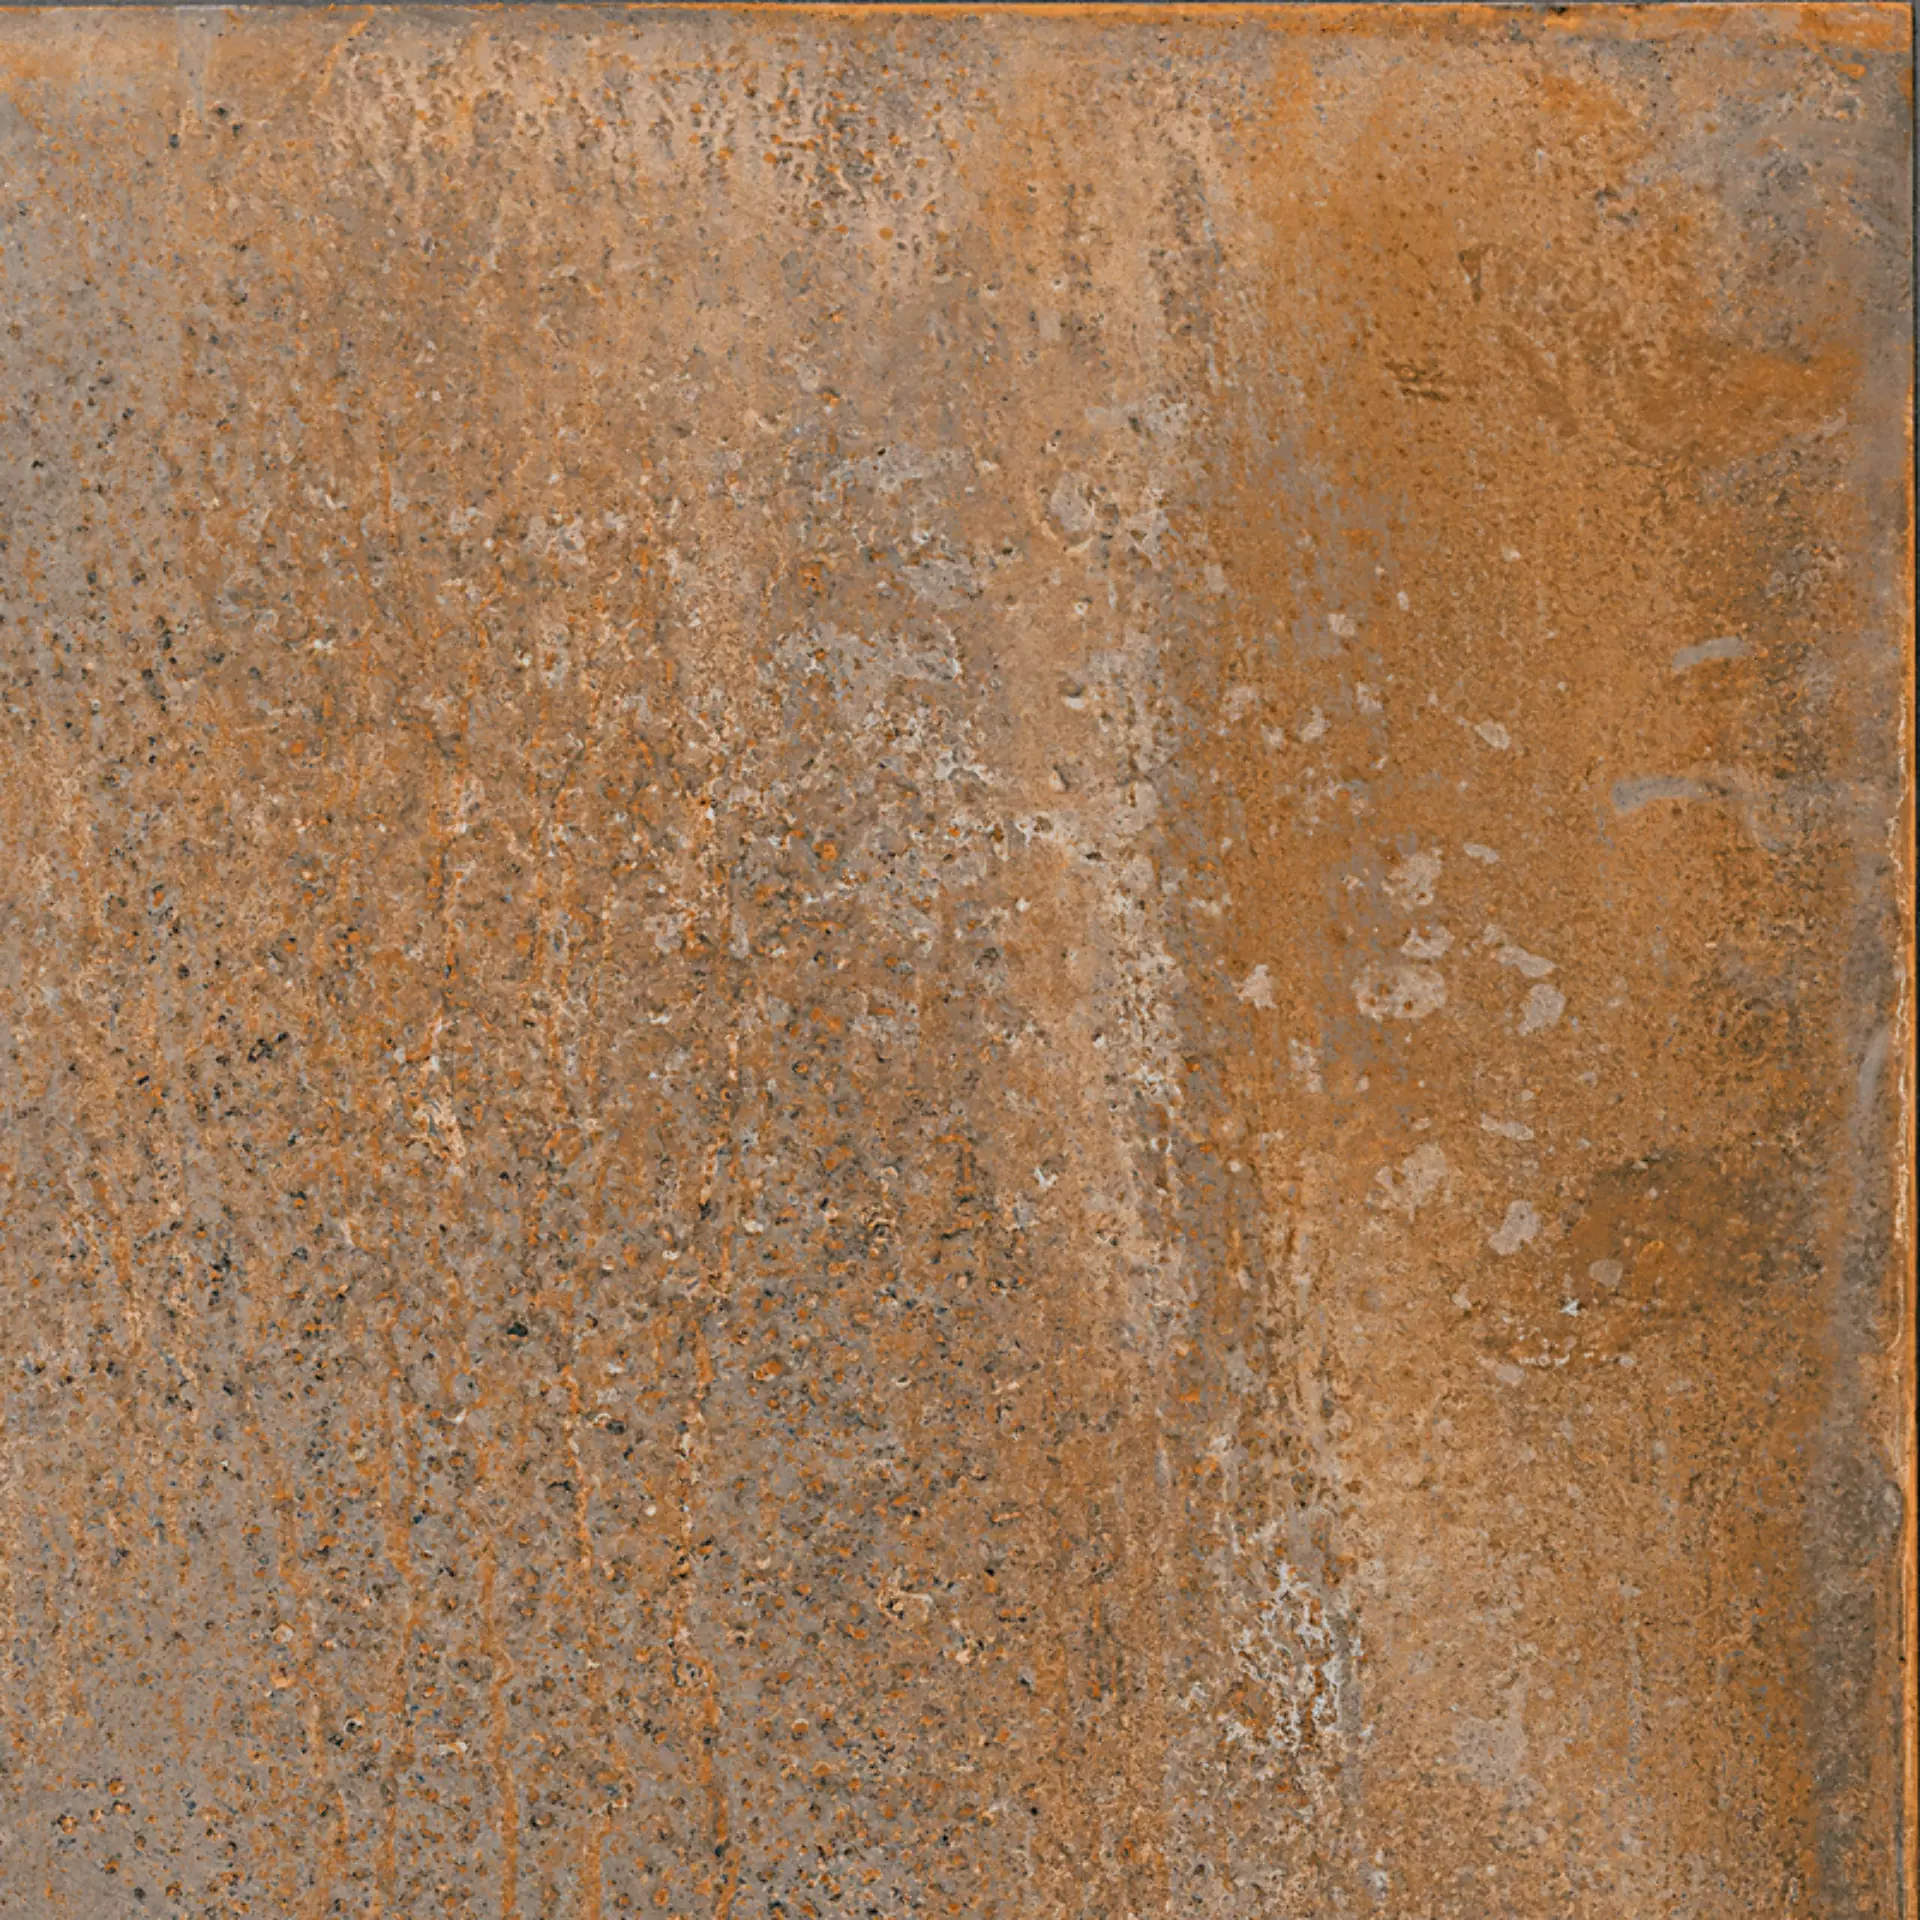 Sant Agostino Oxidart Copper Natural CSAOXCOP20 20x20cm rectified 10mm